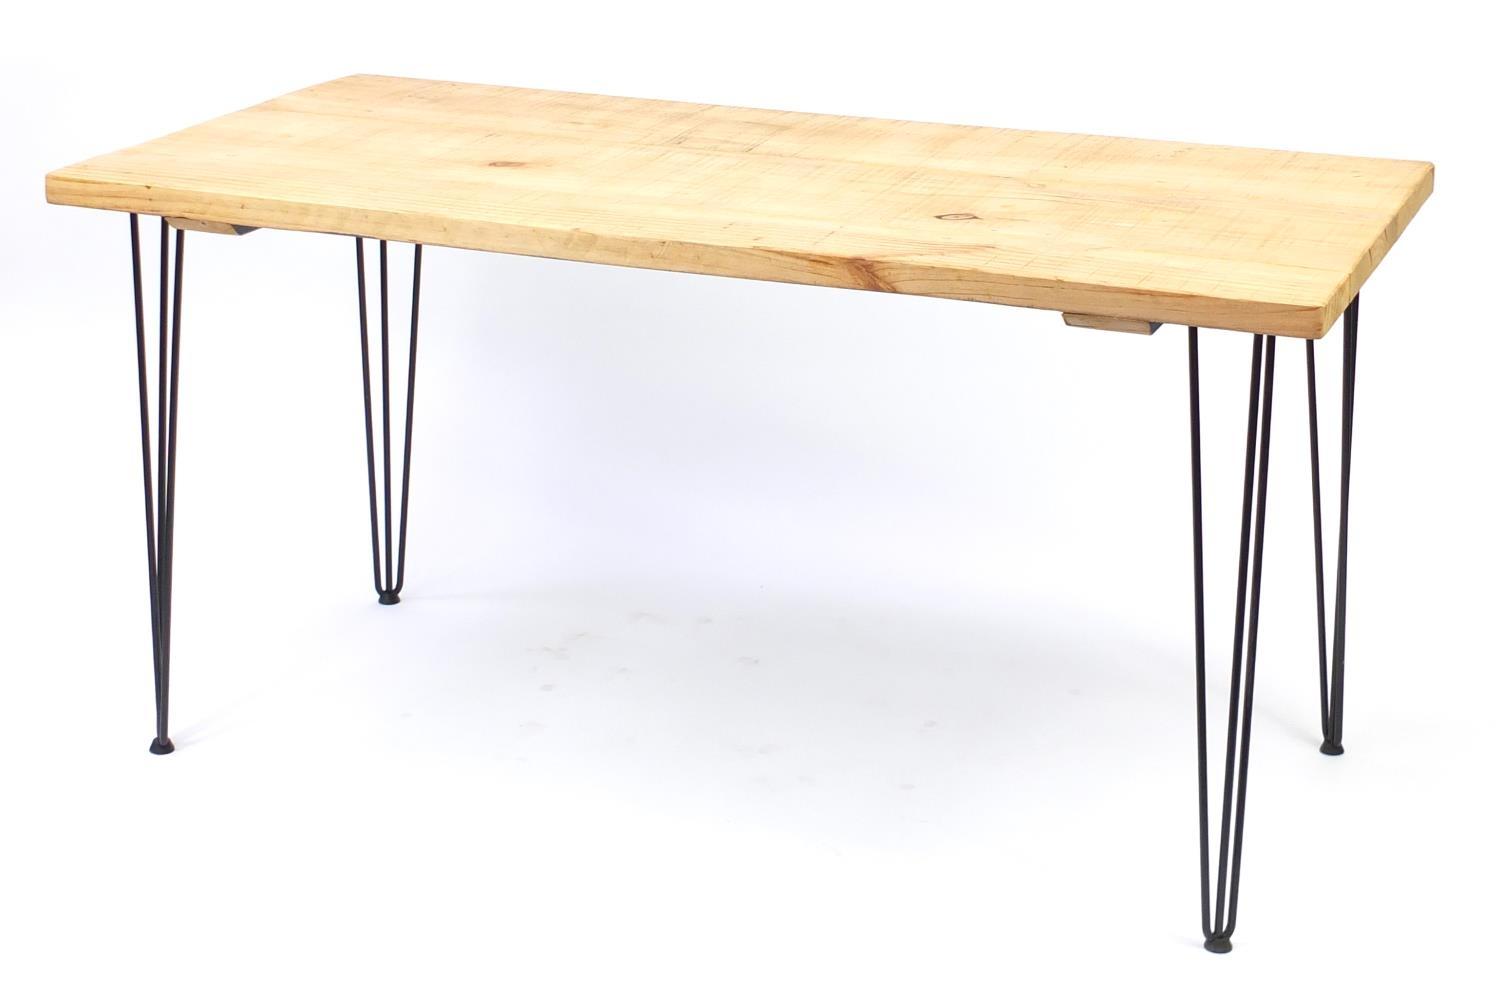 Contemporary light wood dining table with metal hairpin legs, 76c H x 151cm W x 75cm D :For - Image 4 of 4